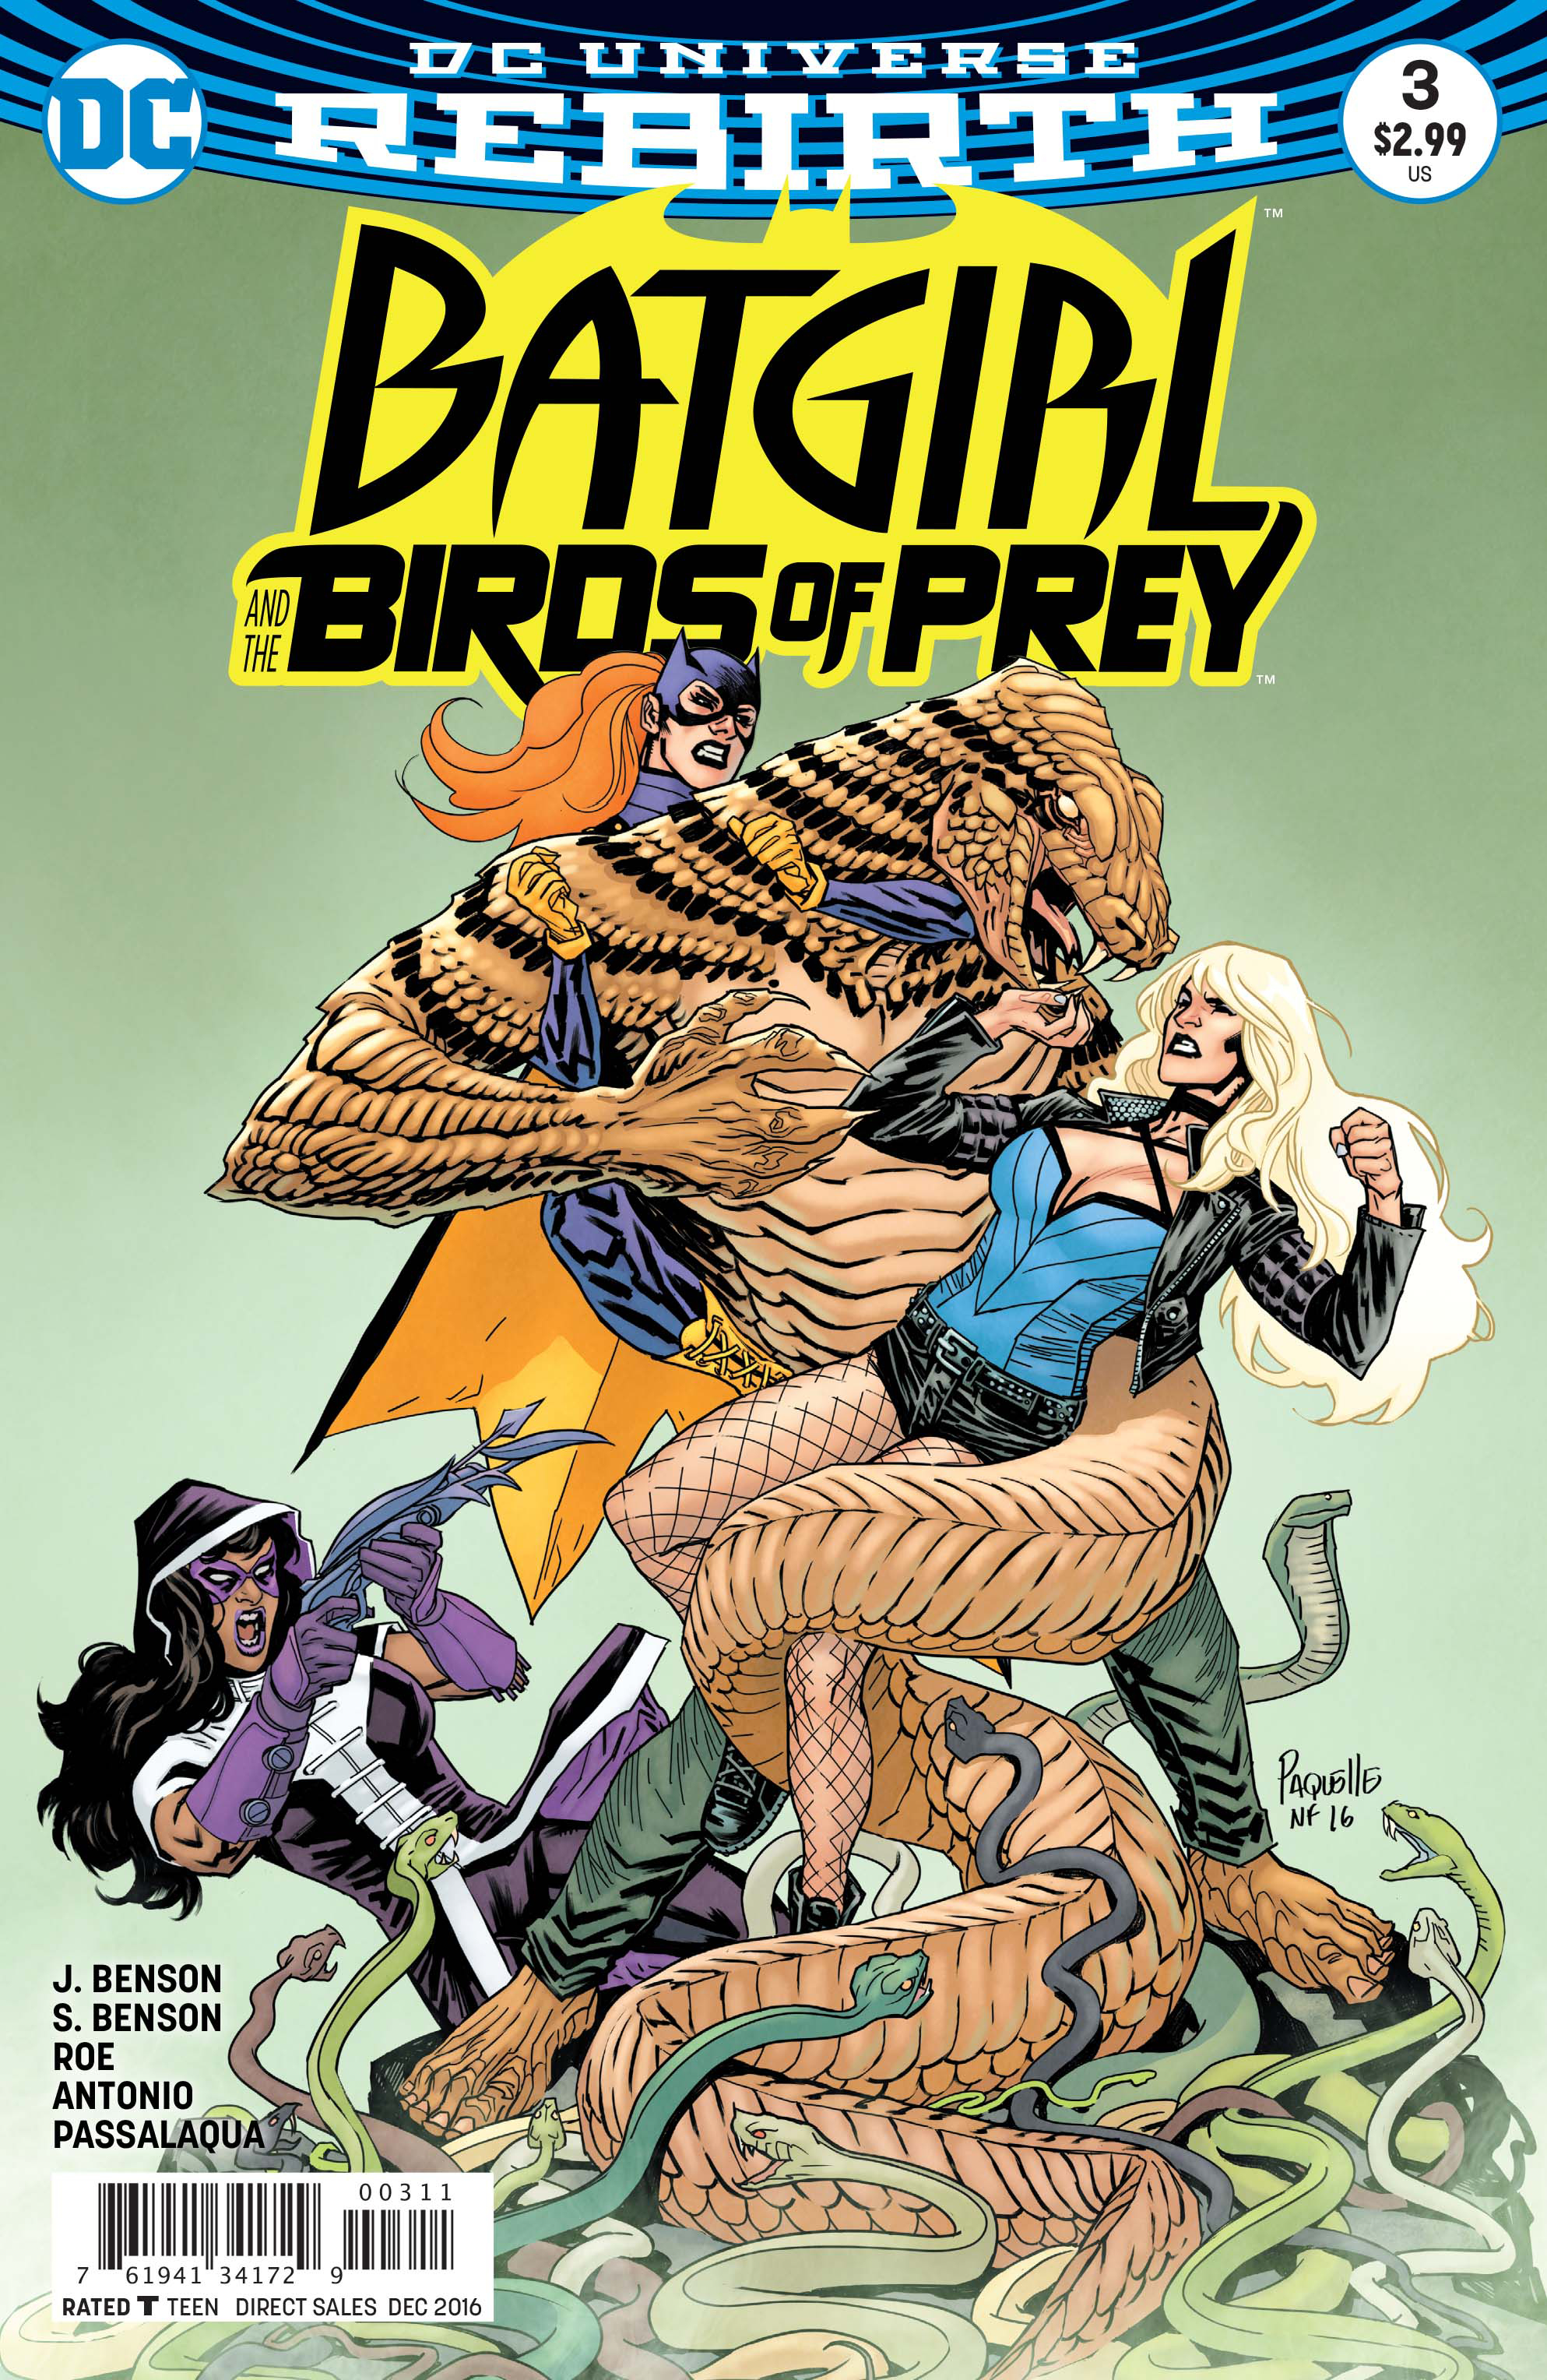 BATGIRL AND THE BIRDS OF PREY #3